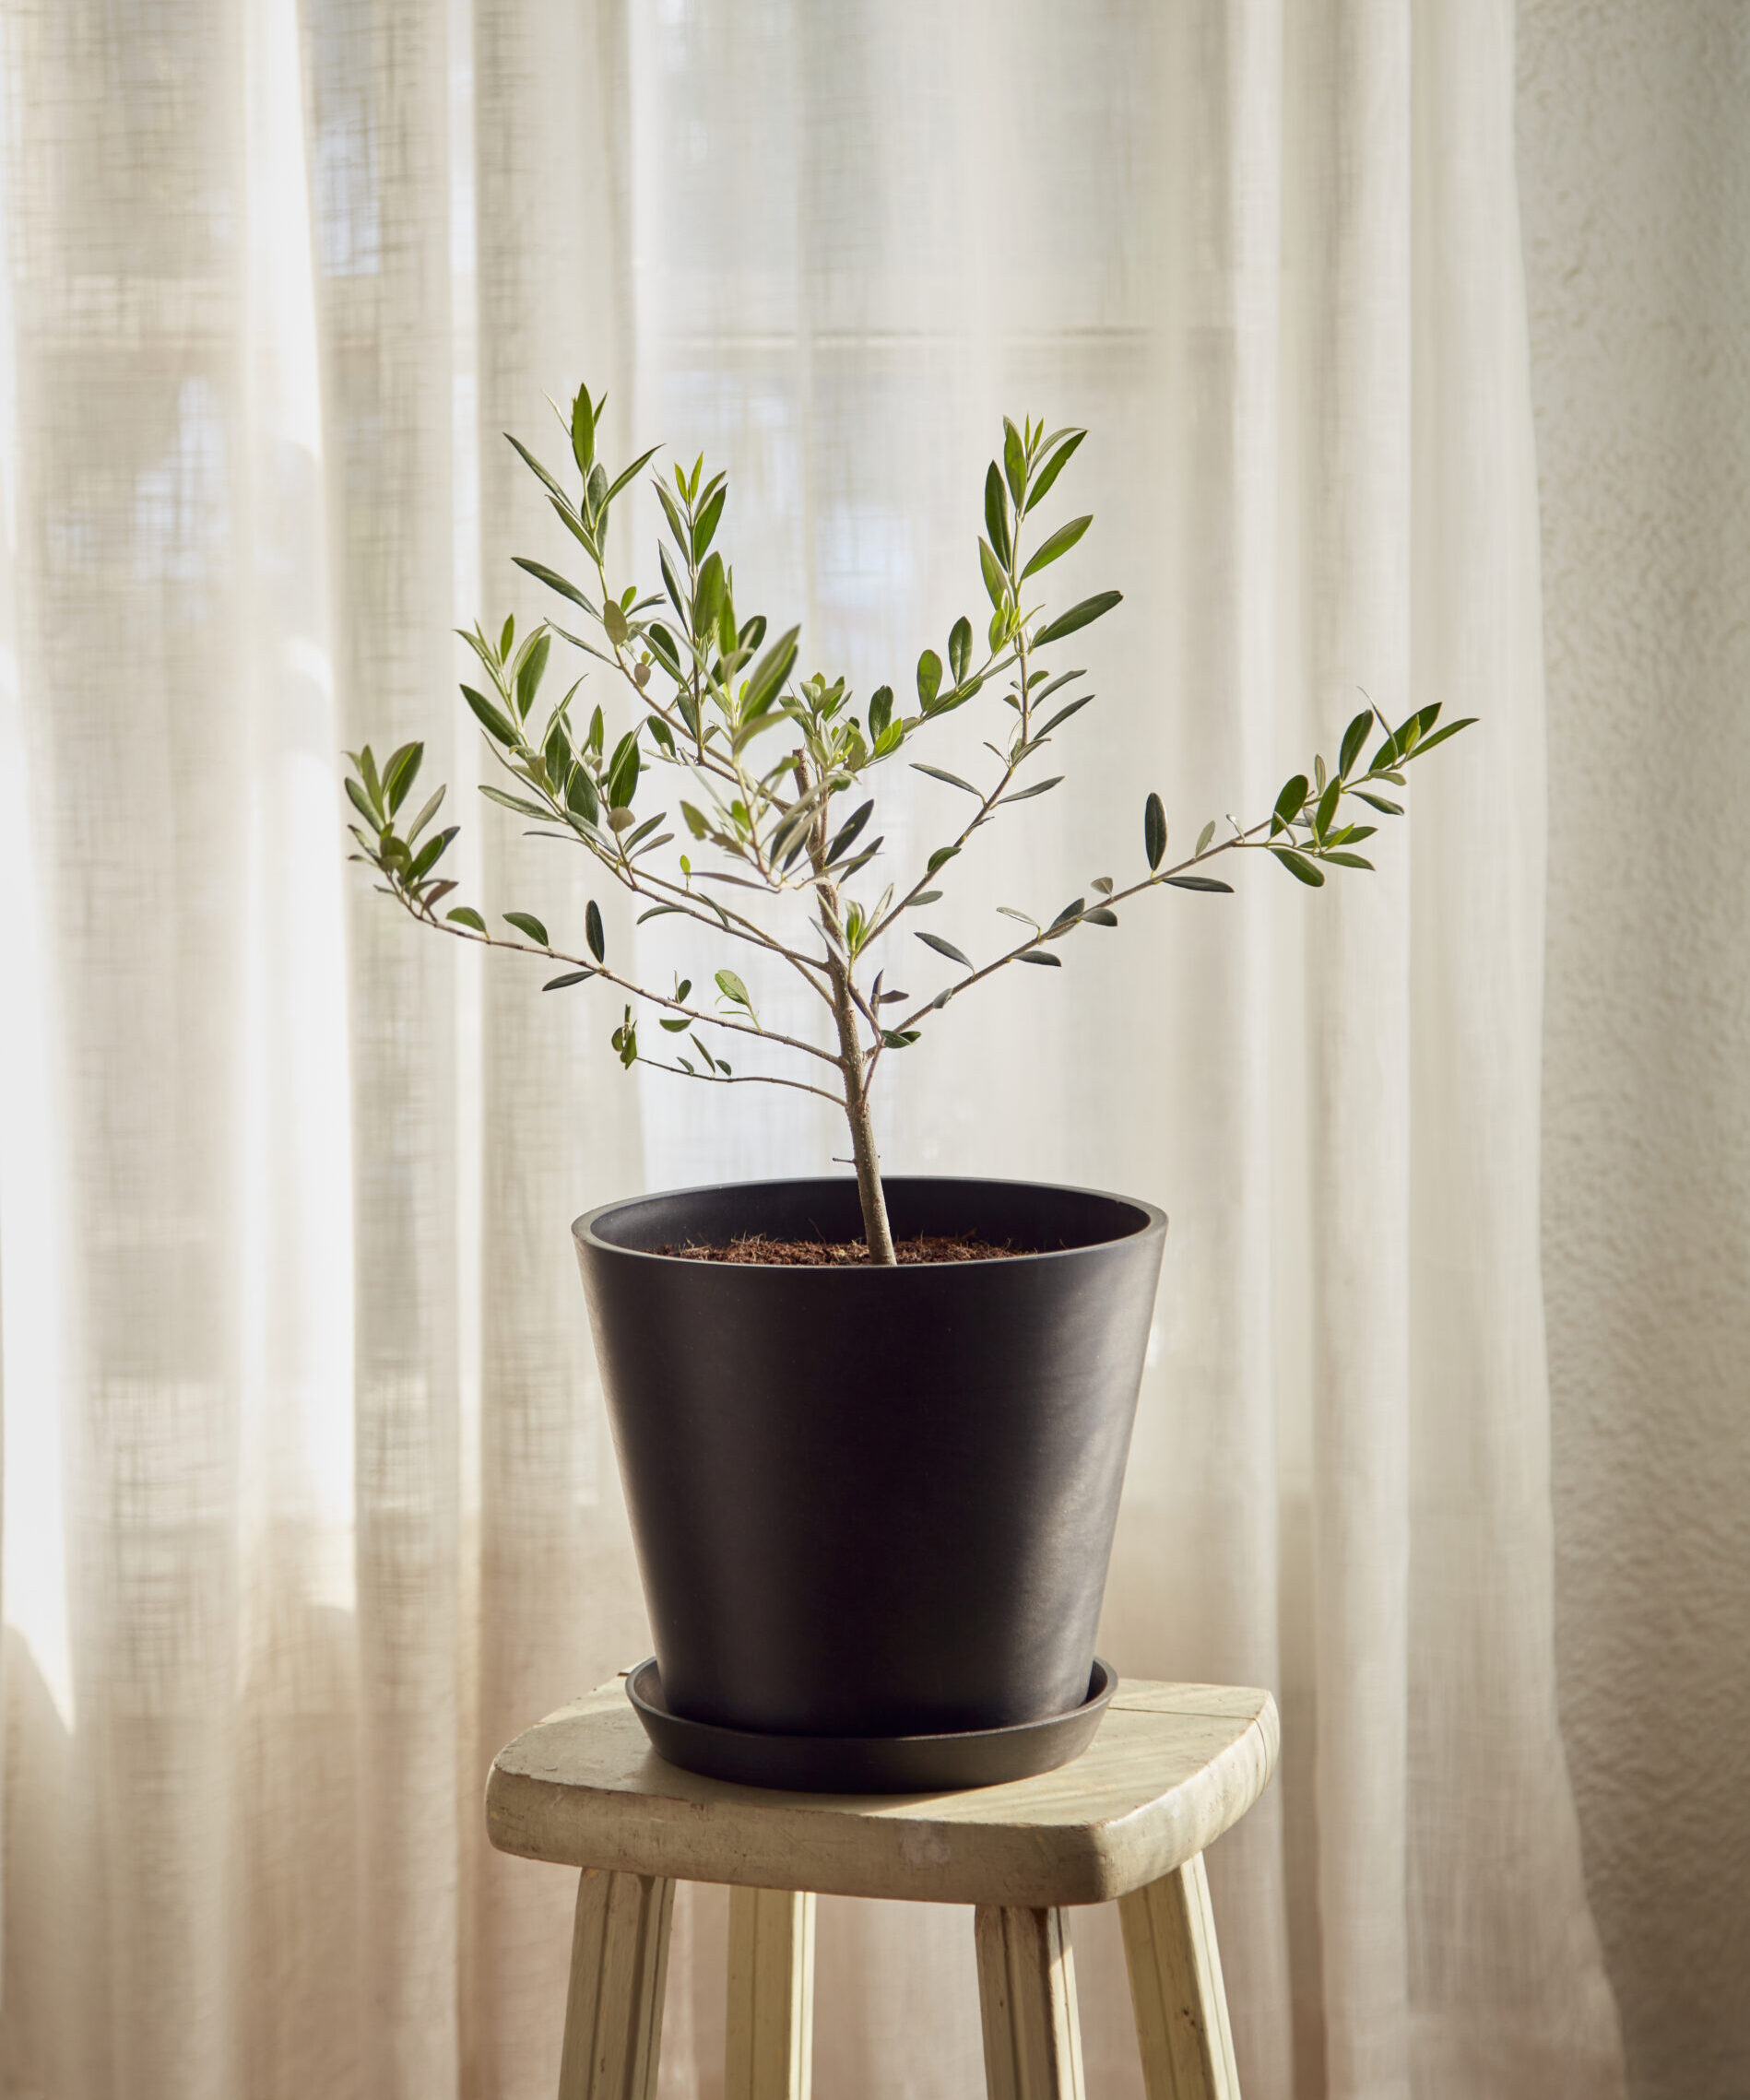 How to Grow and Care for Olive Trees Indoors